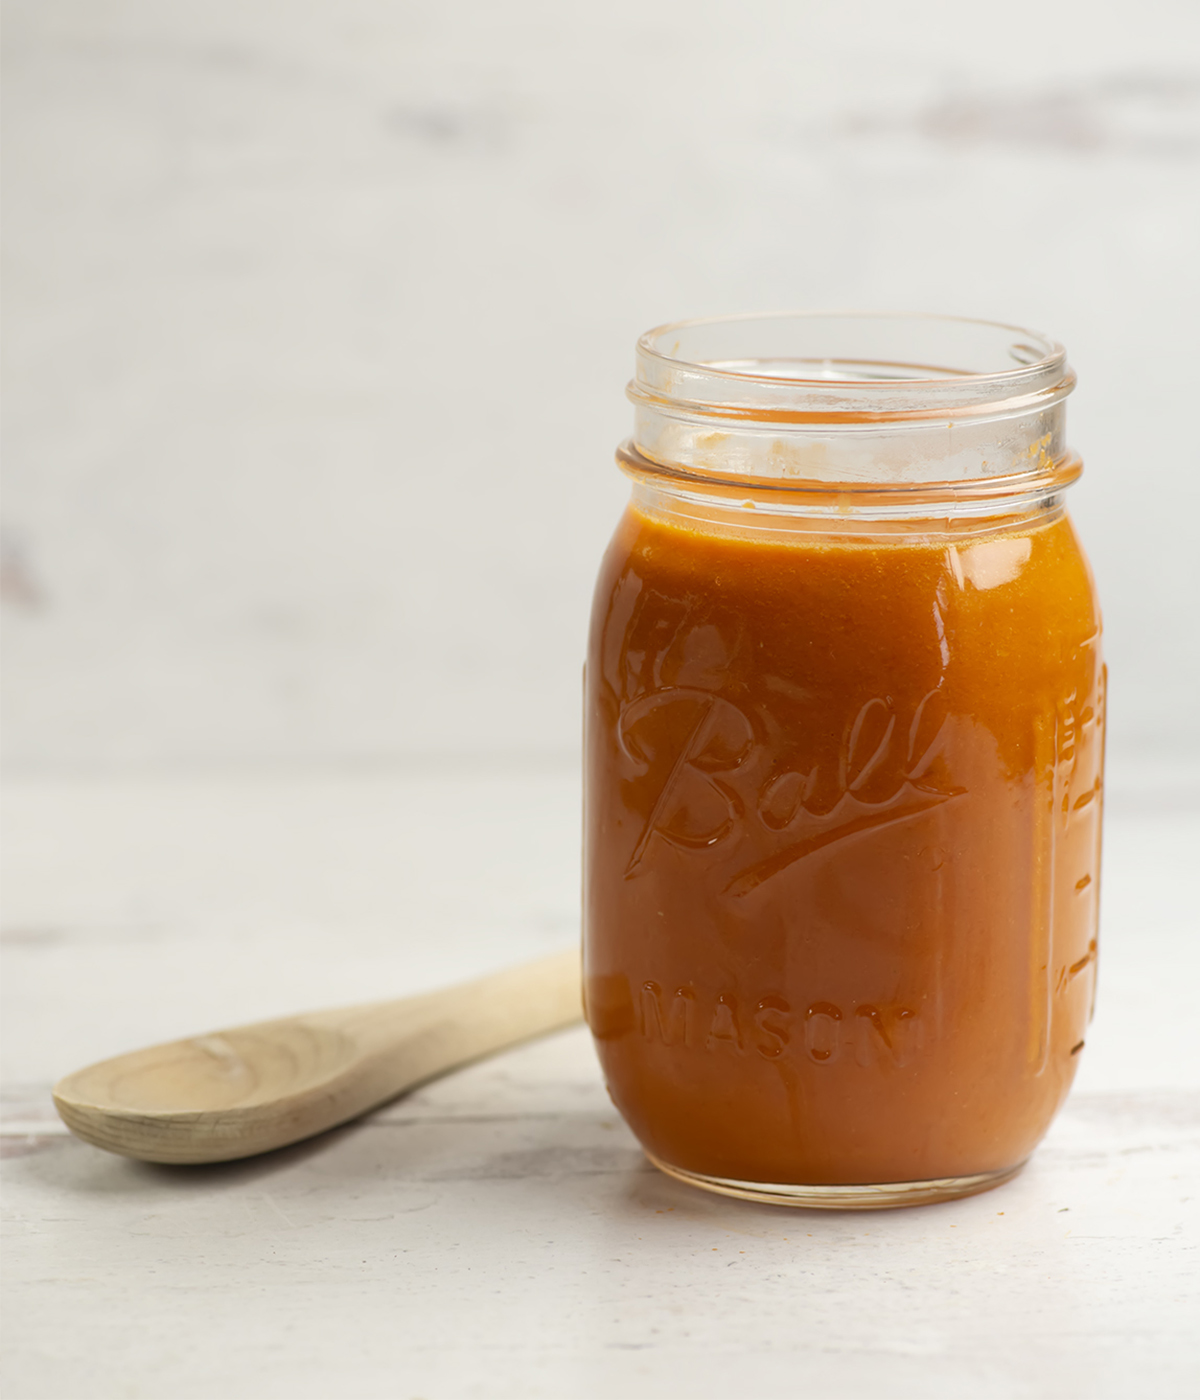 Homemade tomato sauce in a mason jar with a wooden spoon.